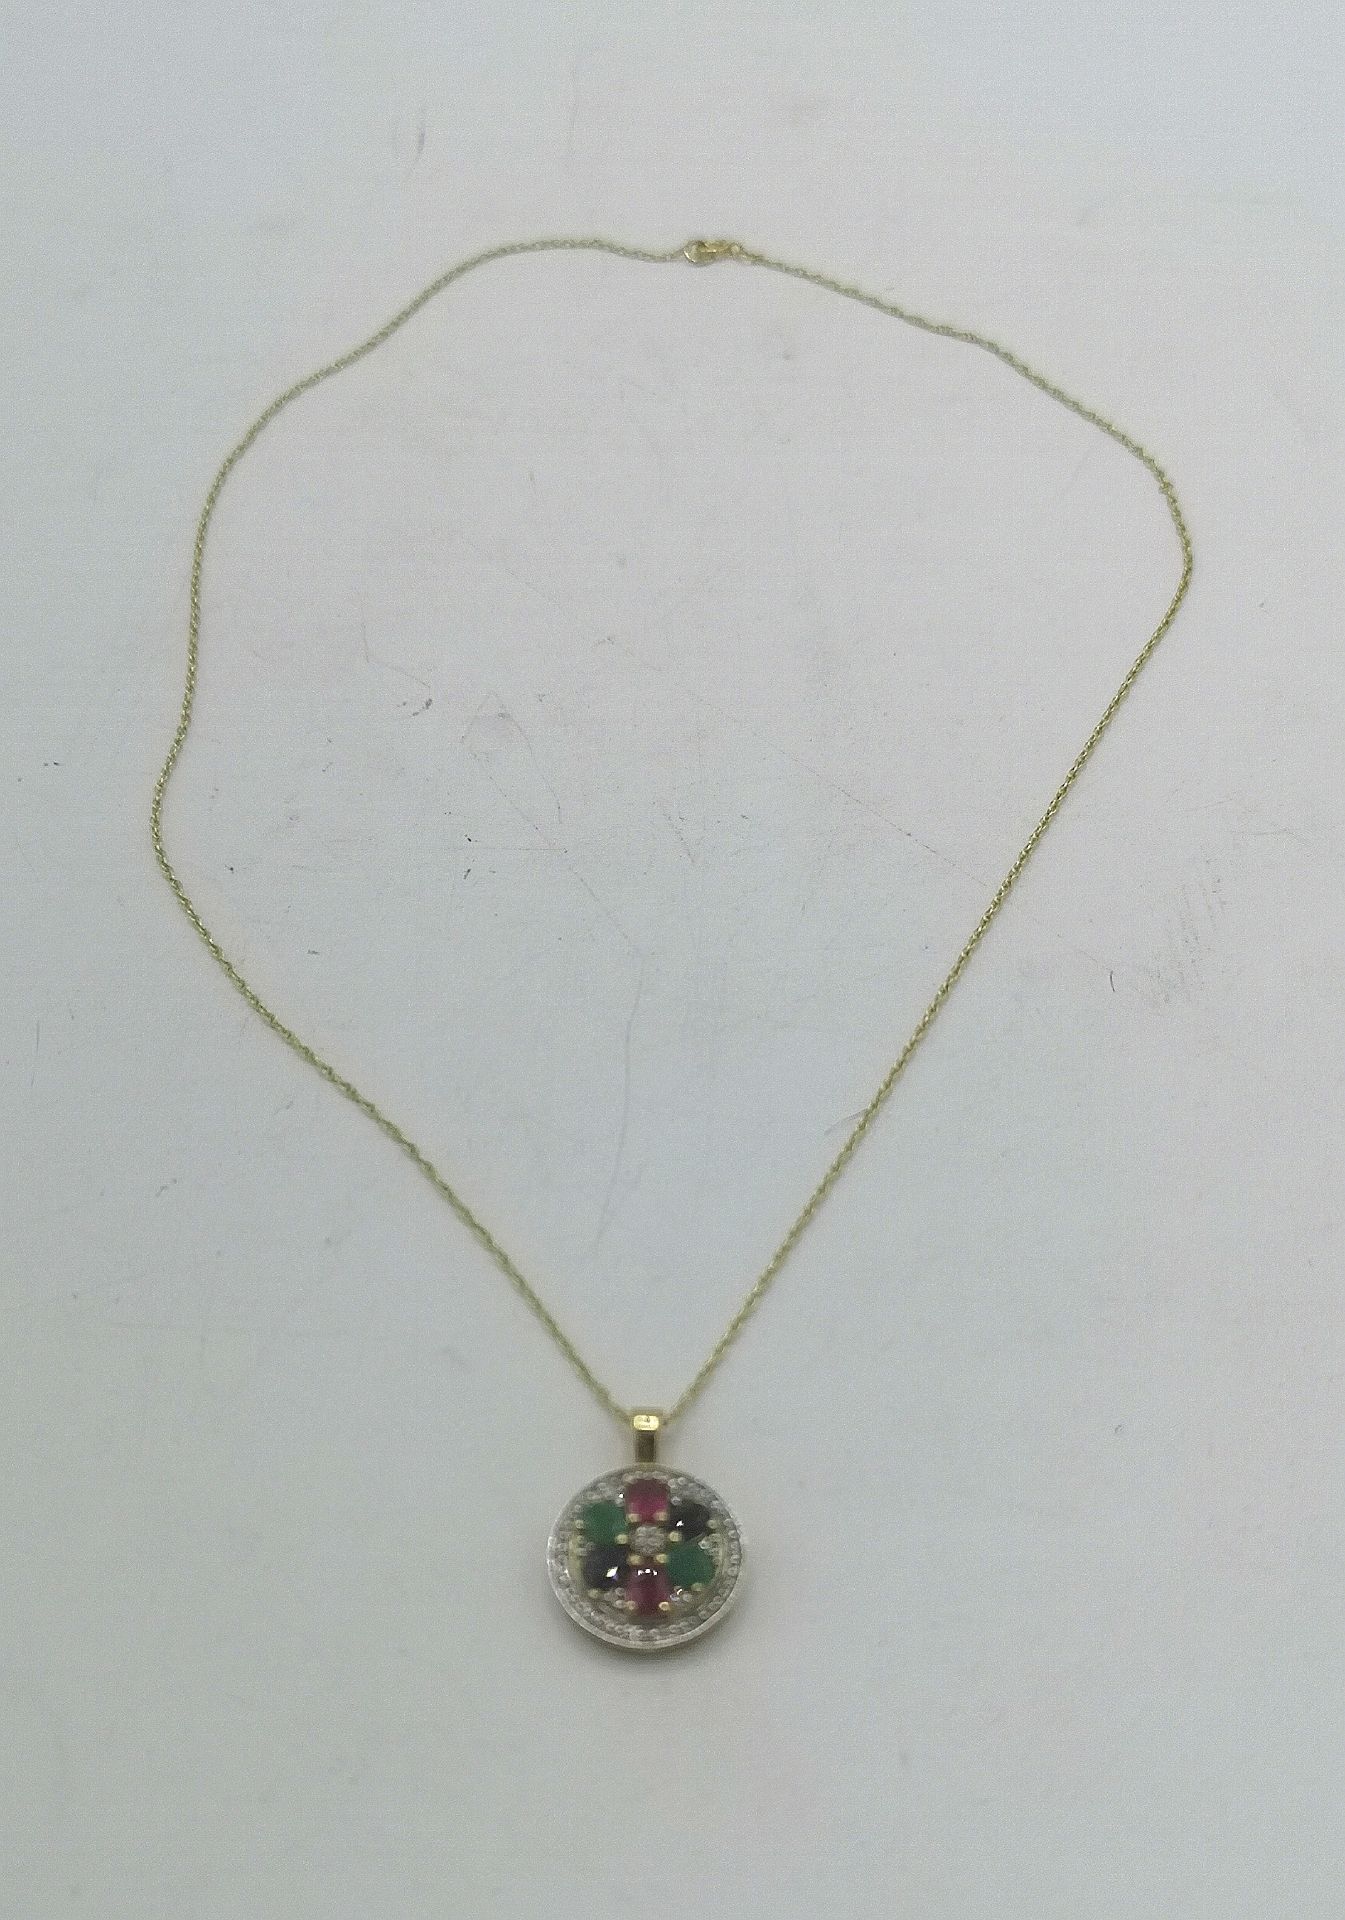 9ct gold pendant set with rubies, emeralds and sapphires - Image 3 of 8